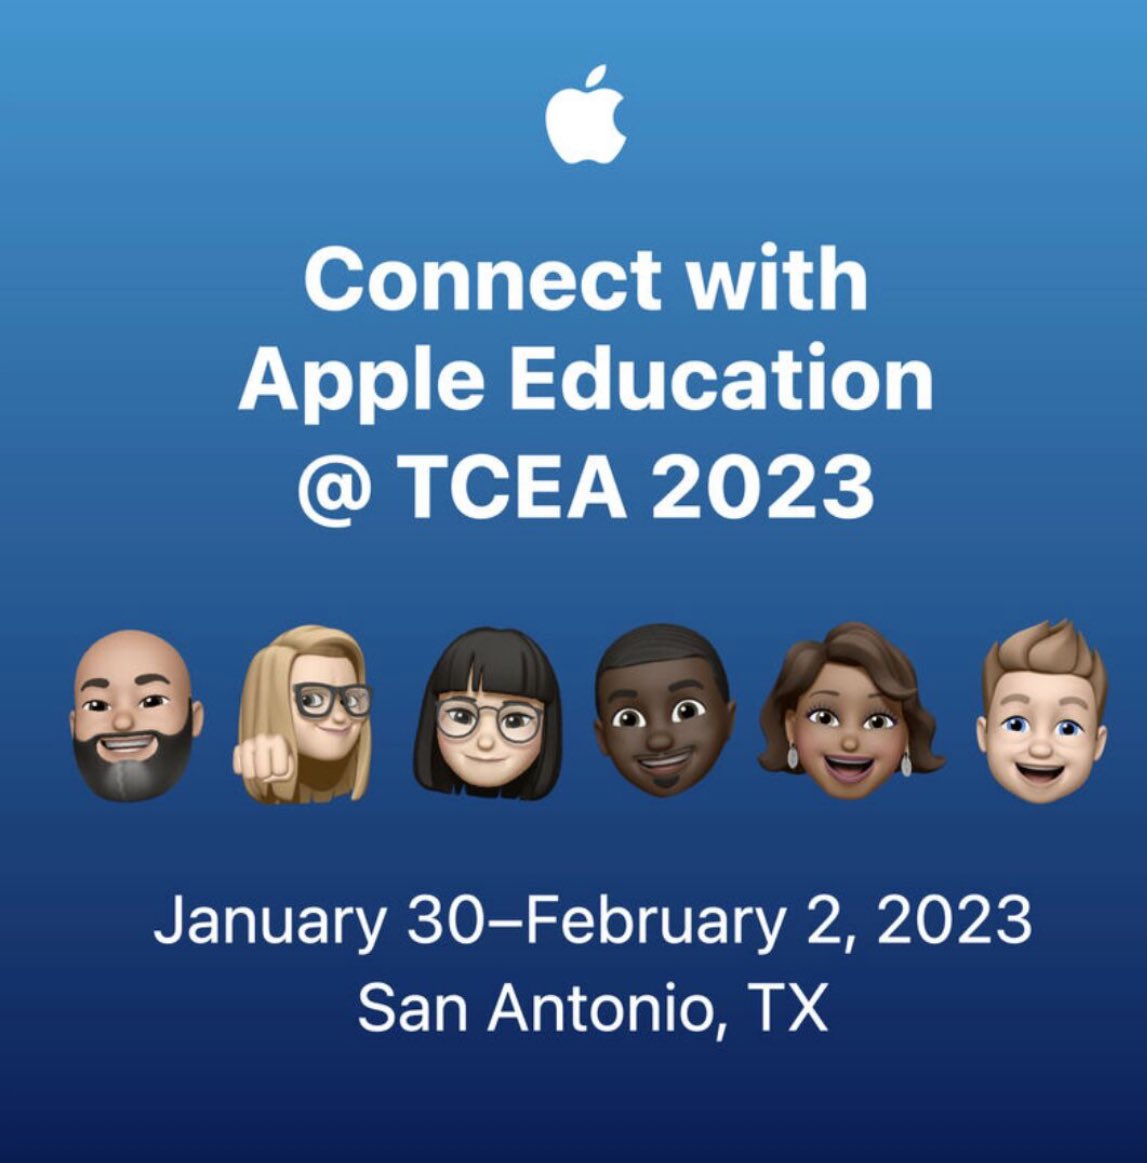 Today is the day! At TCEA? Come see us! 👋🏼

📣🗓️ Join Apple’s sessions at #TCEA2023 from January 30 to February 2, 2023, in Room 221A. 

Our session topics are designed to infuse passion and limitless possibilities for the future of education.